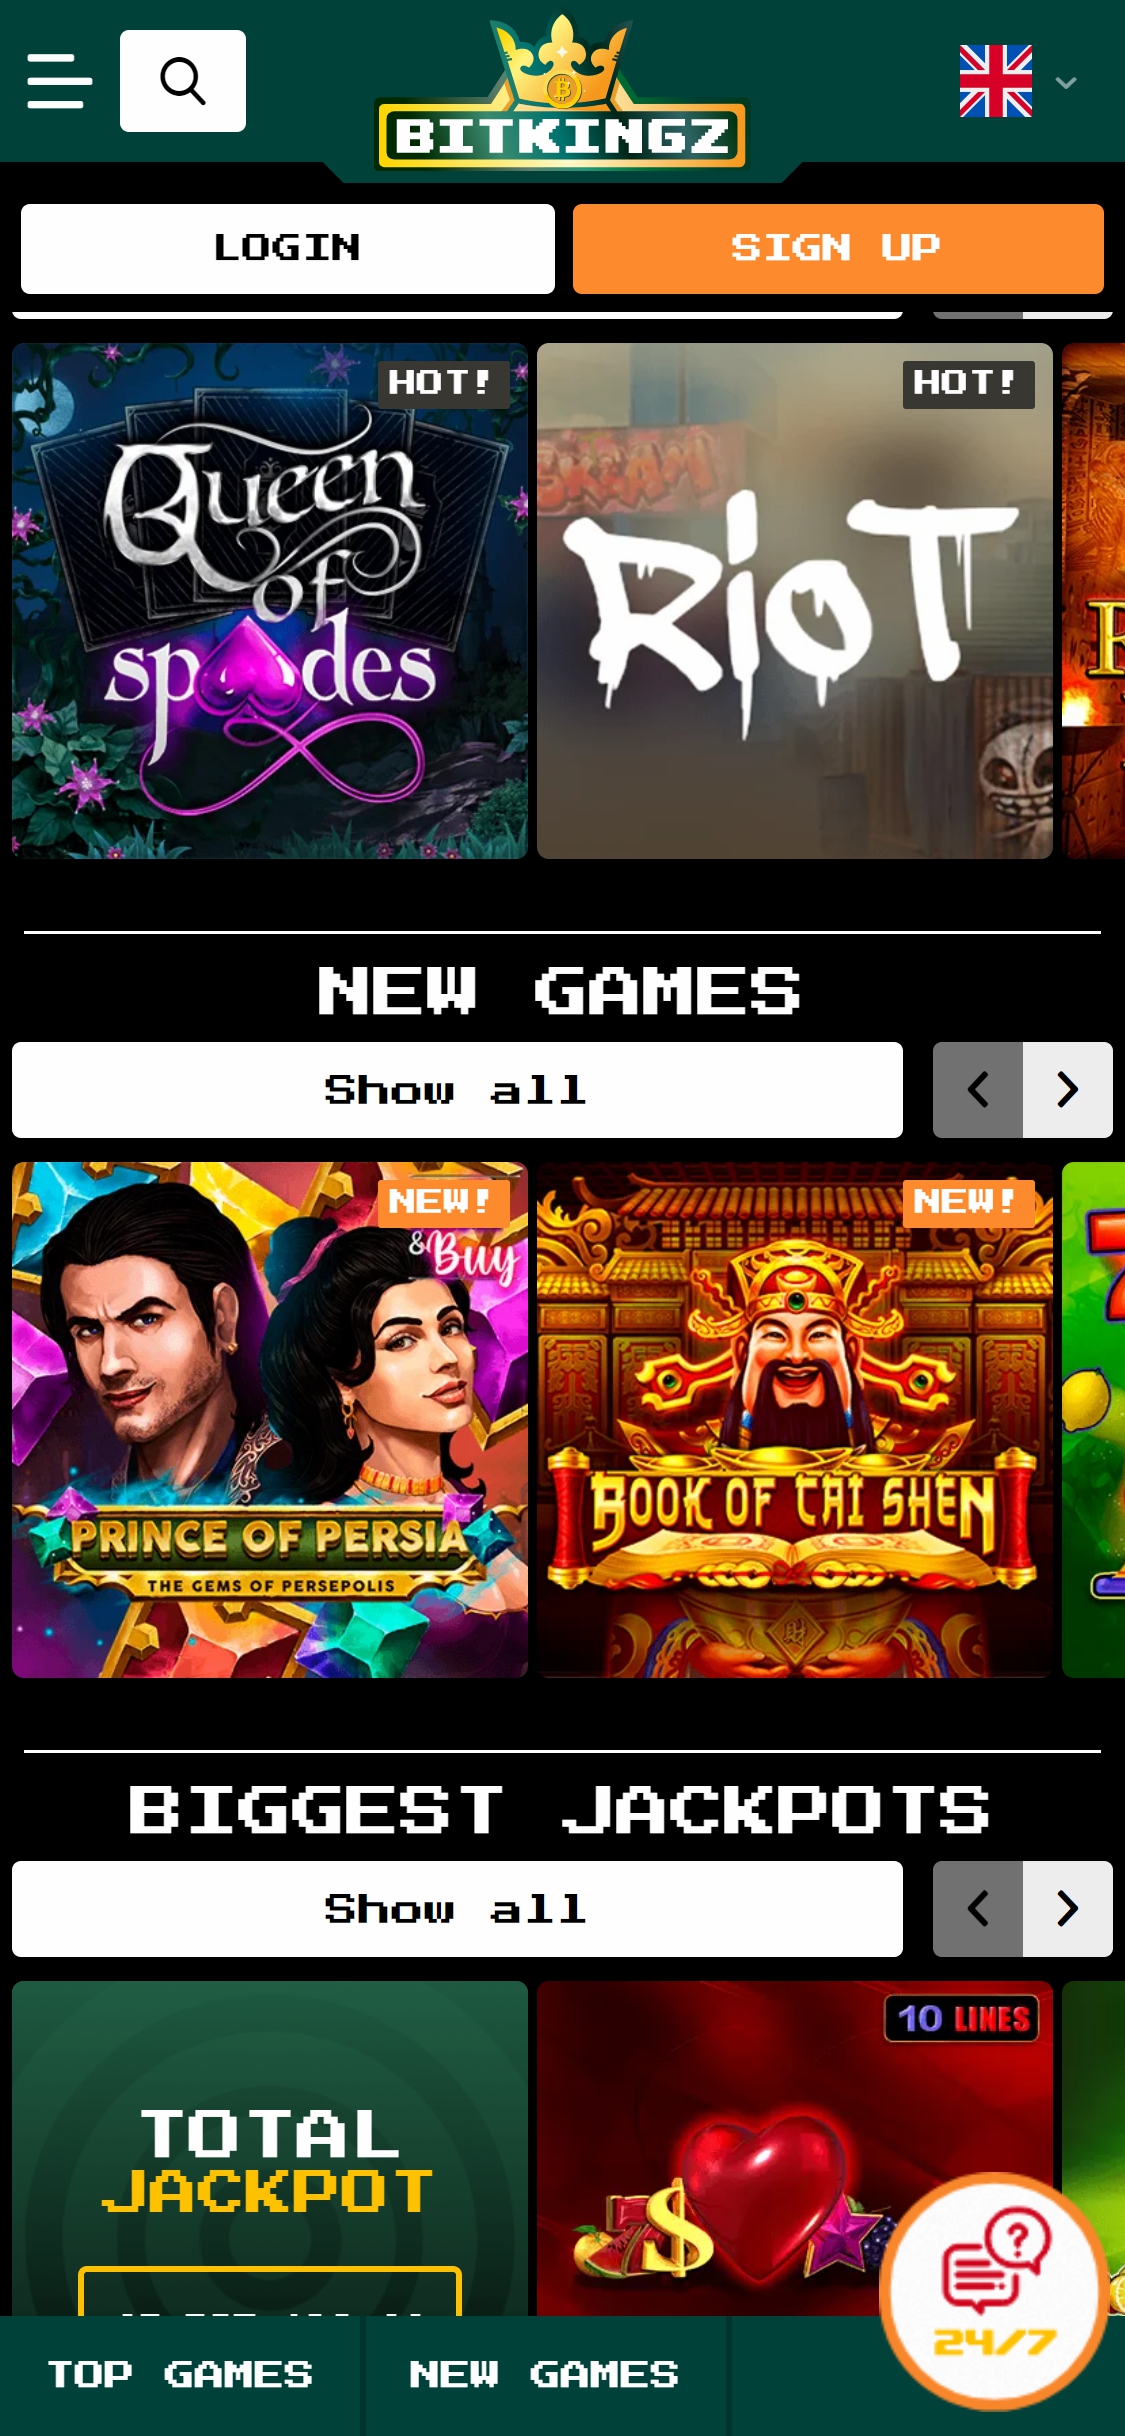 Bitkingz Casino Mobile Games Review